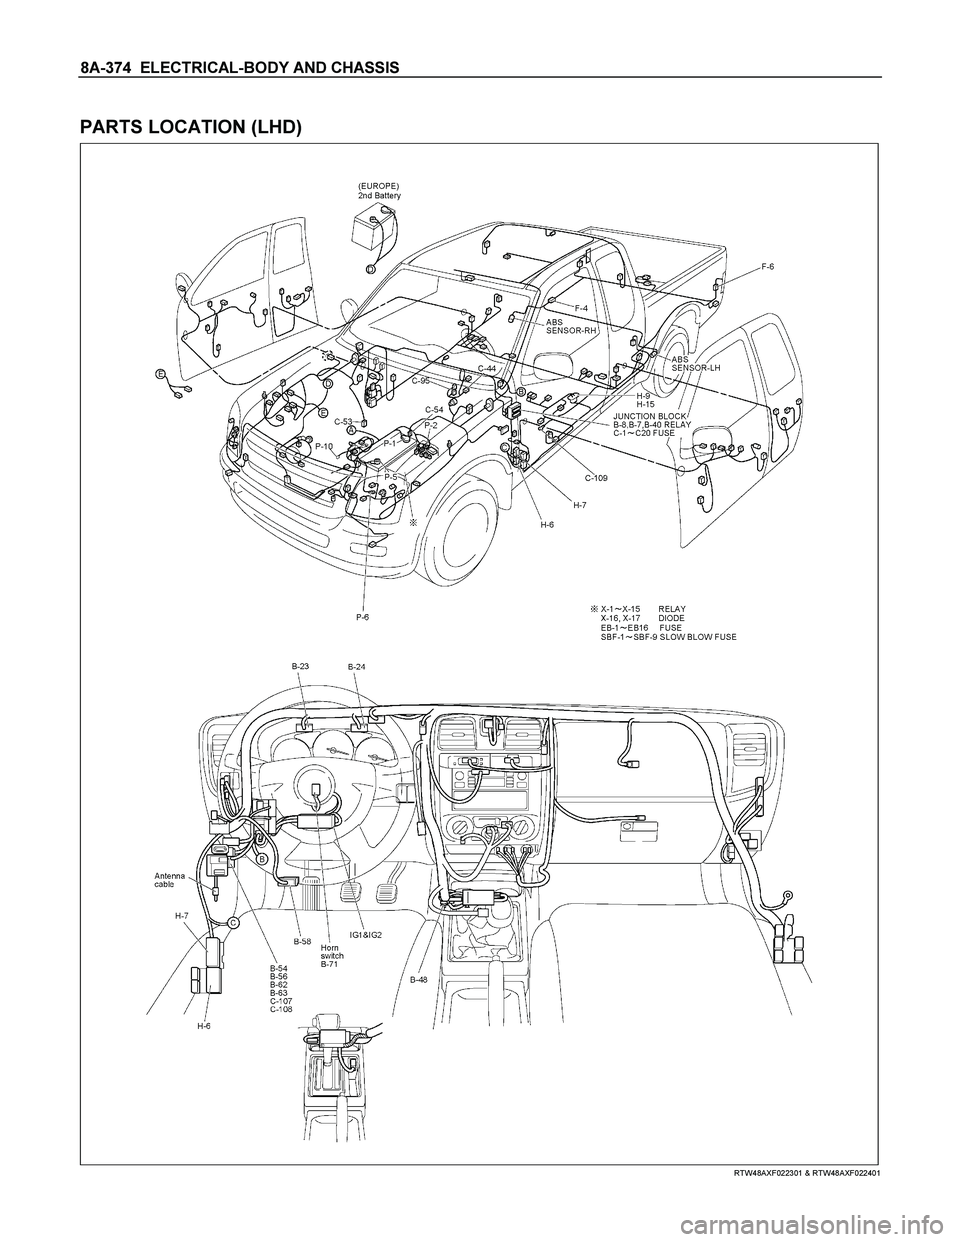 ISUZU TF SERIES 2004  Workshop Manual 8A-374  ELECTRICAL-BODY AND CHASSIS 
 
PARTS LOCATION (LHD) 
  
 
 
 
 
 
RTW48AXF022301 & RTW48AXF022401 
  